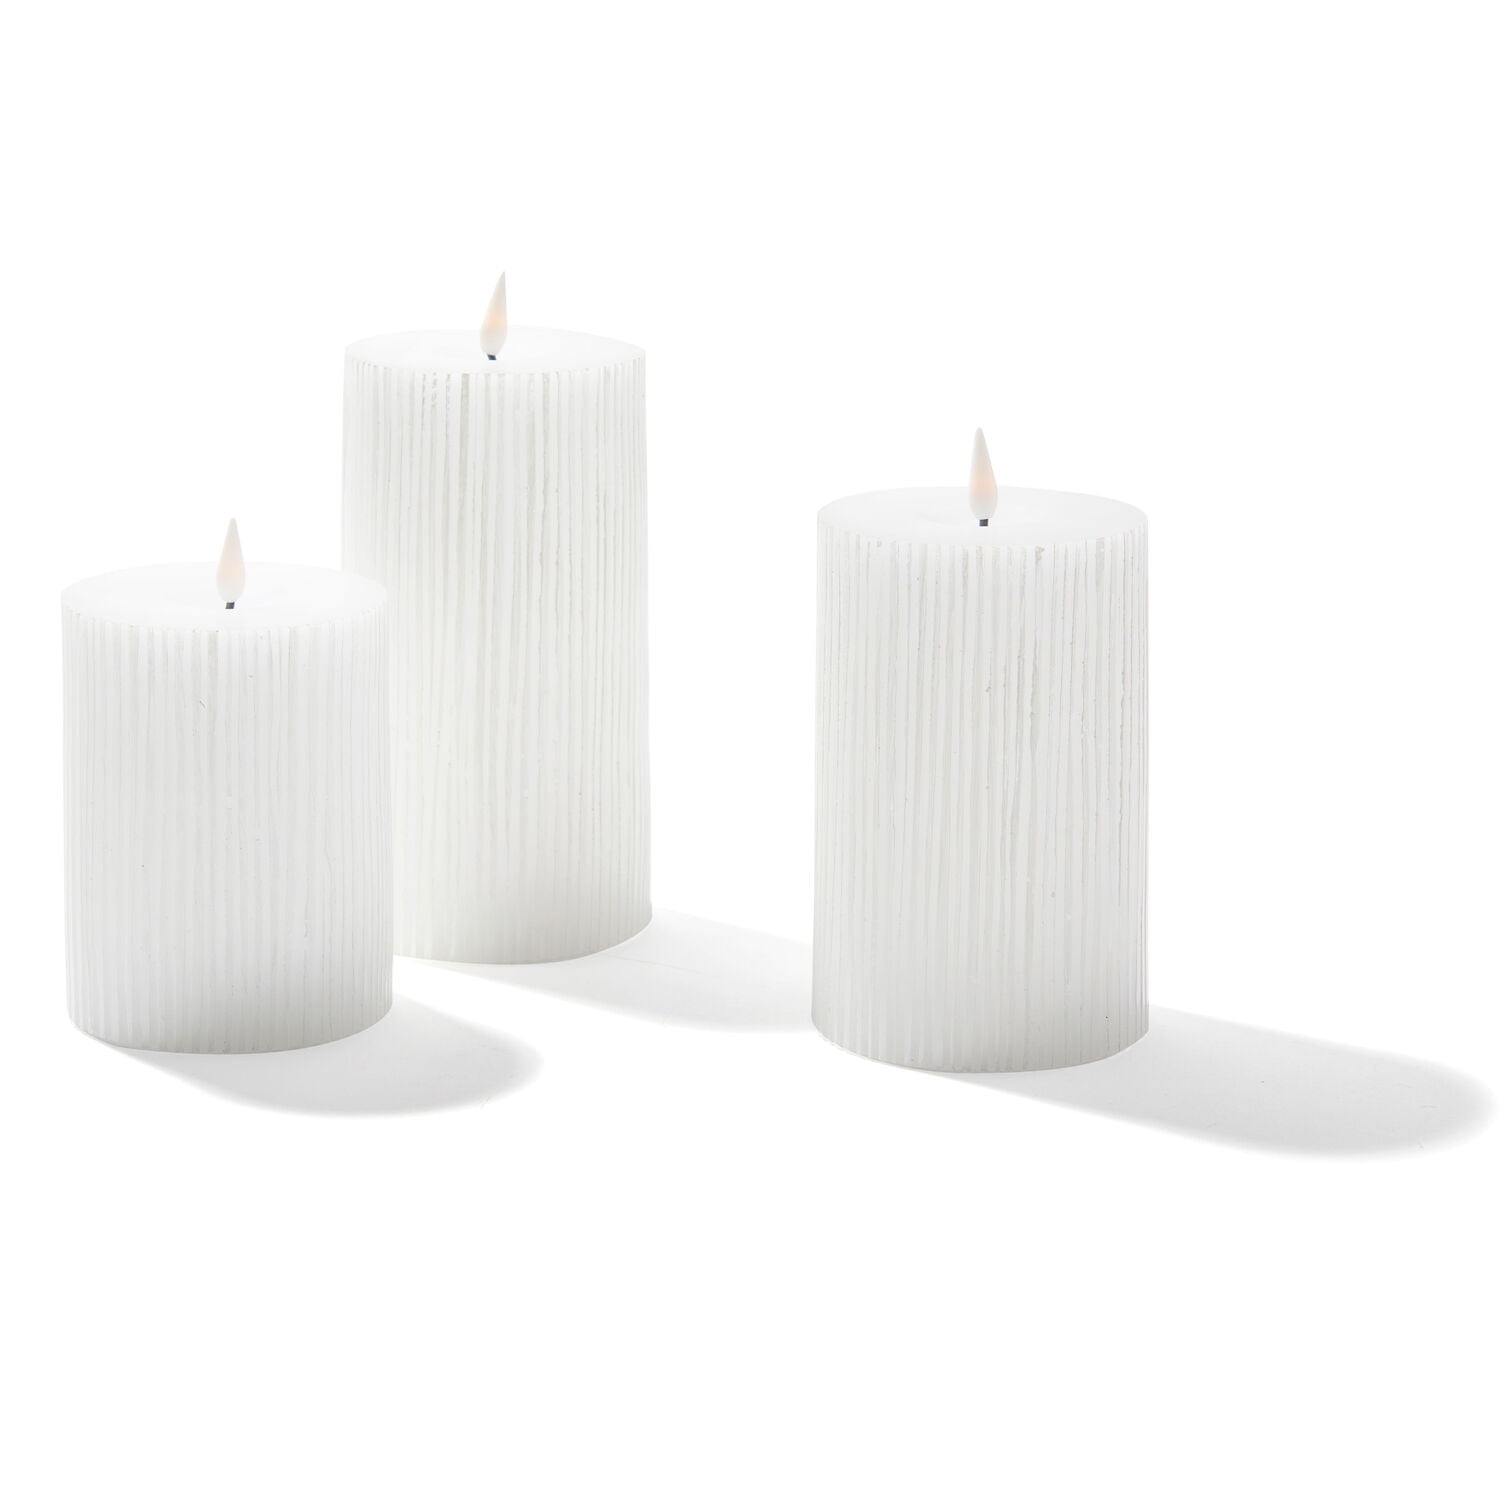 Batteries Included Distressed Wax Finished Set of 3 Warm White Flicking Light Flameless Led Candle Gift Set Red Battery Operated Candle with Timer